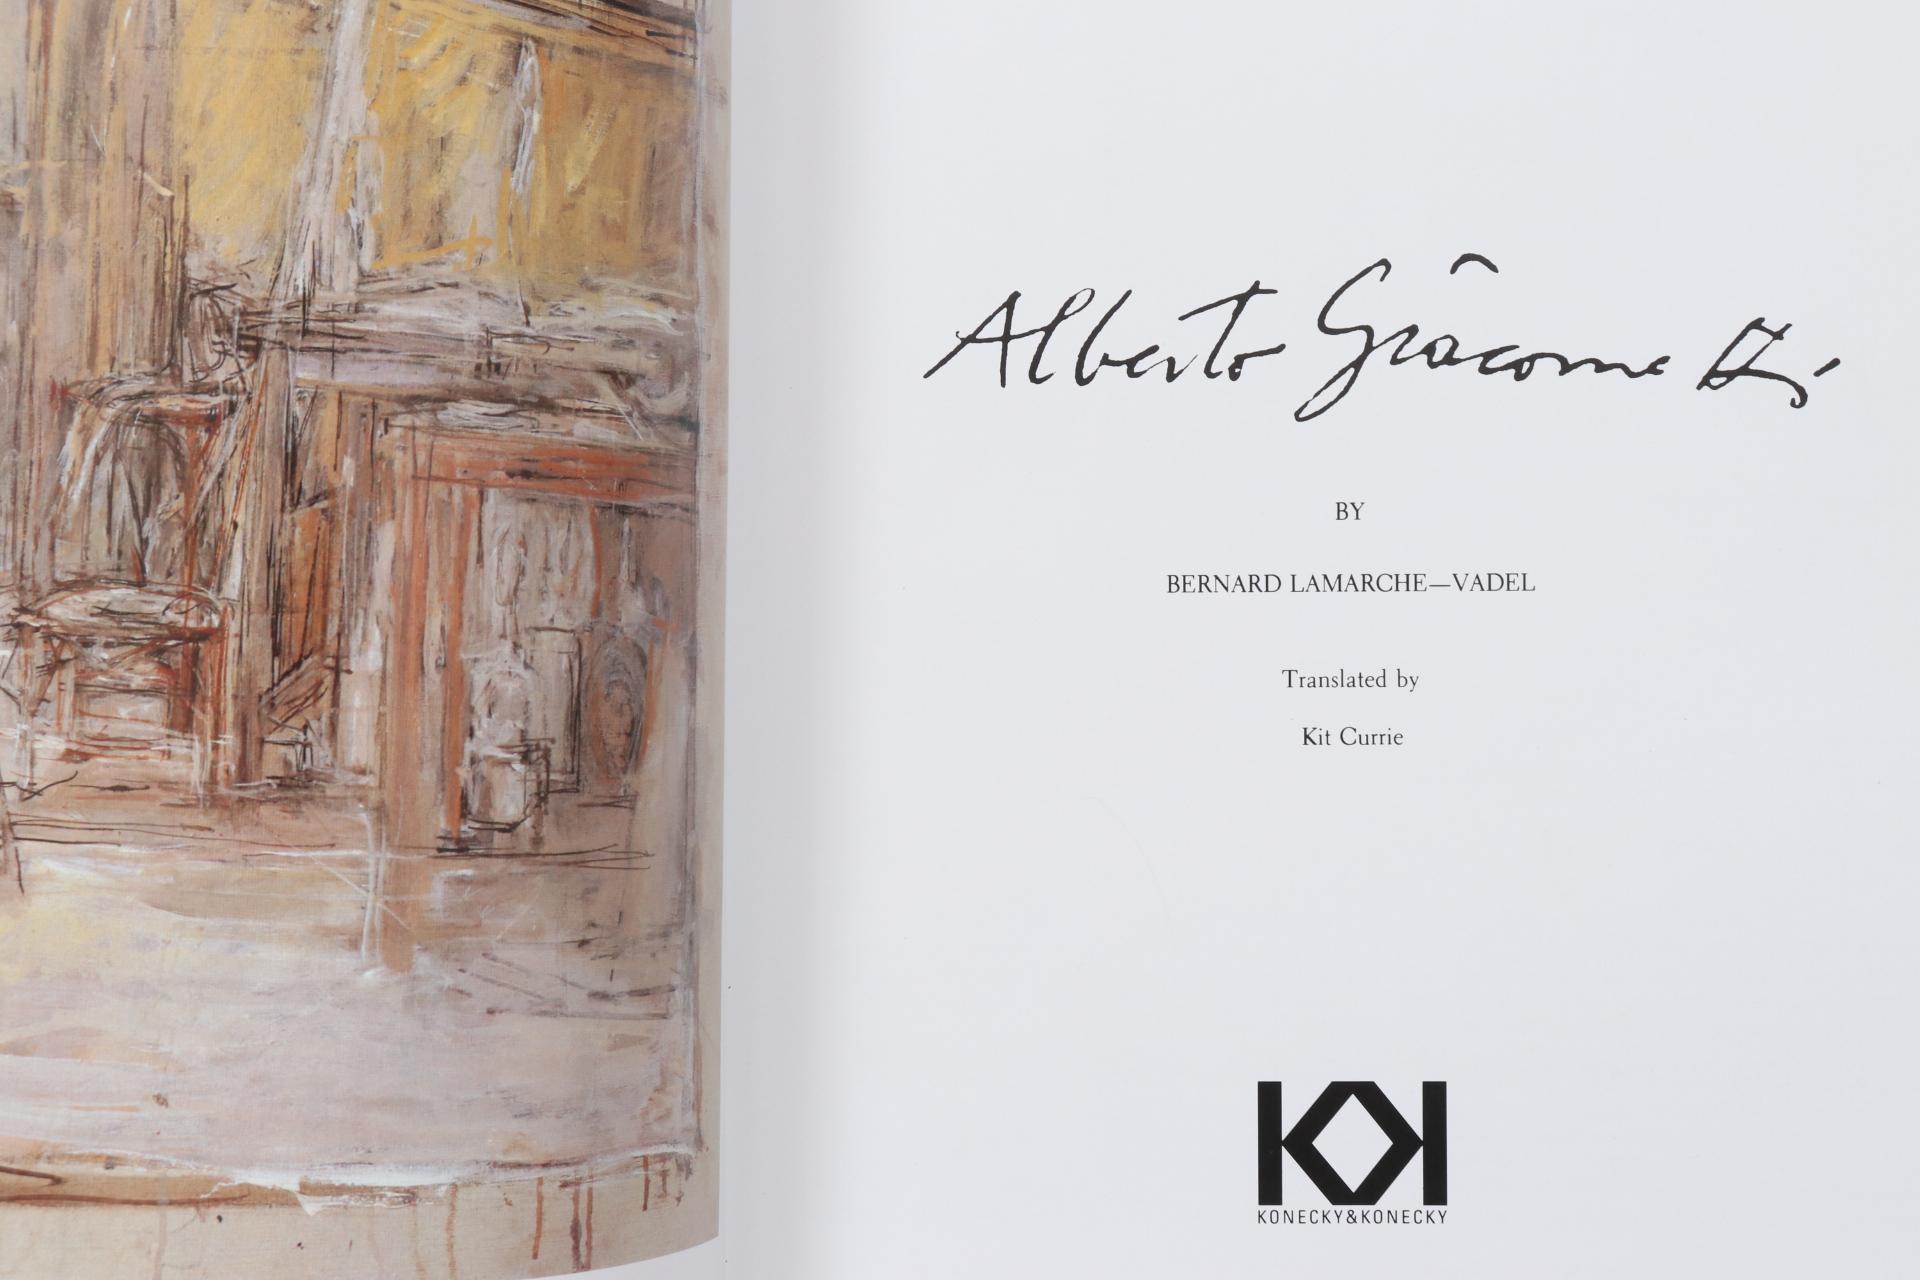 Alberto Giacometti by Bernard Lamarche-Vadel. Hardcover book with dustjacket. Published in 1989 by Konecky & Konecky. Printed and bound in Singapore. Illustrated, 176 pages.